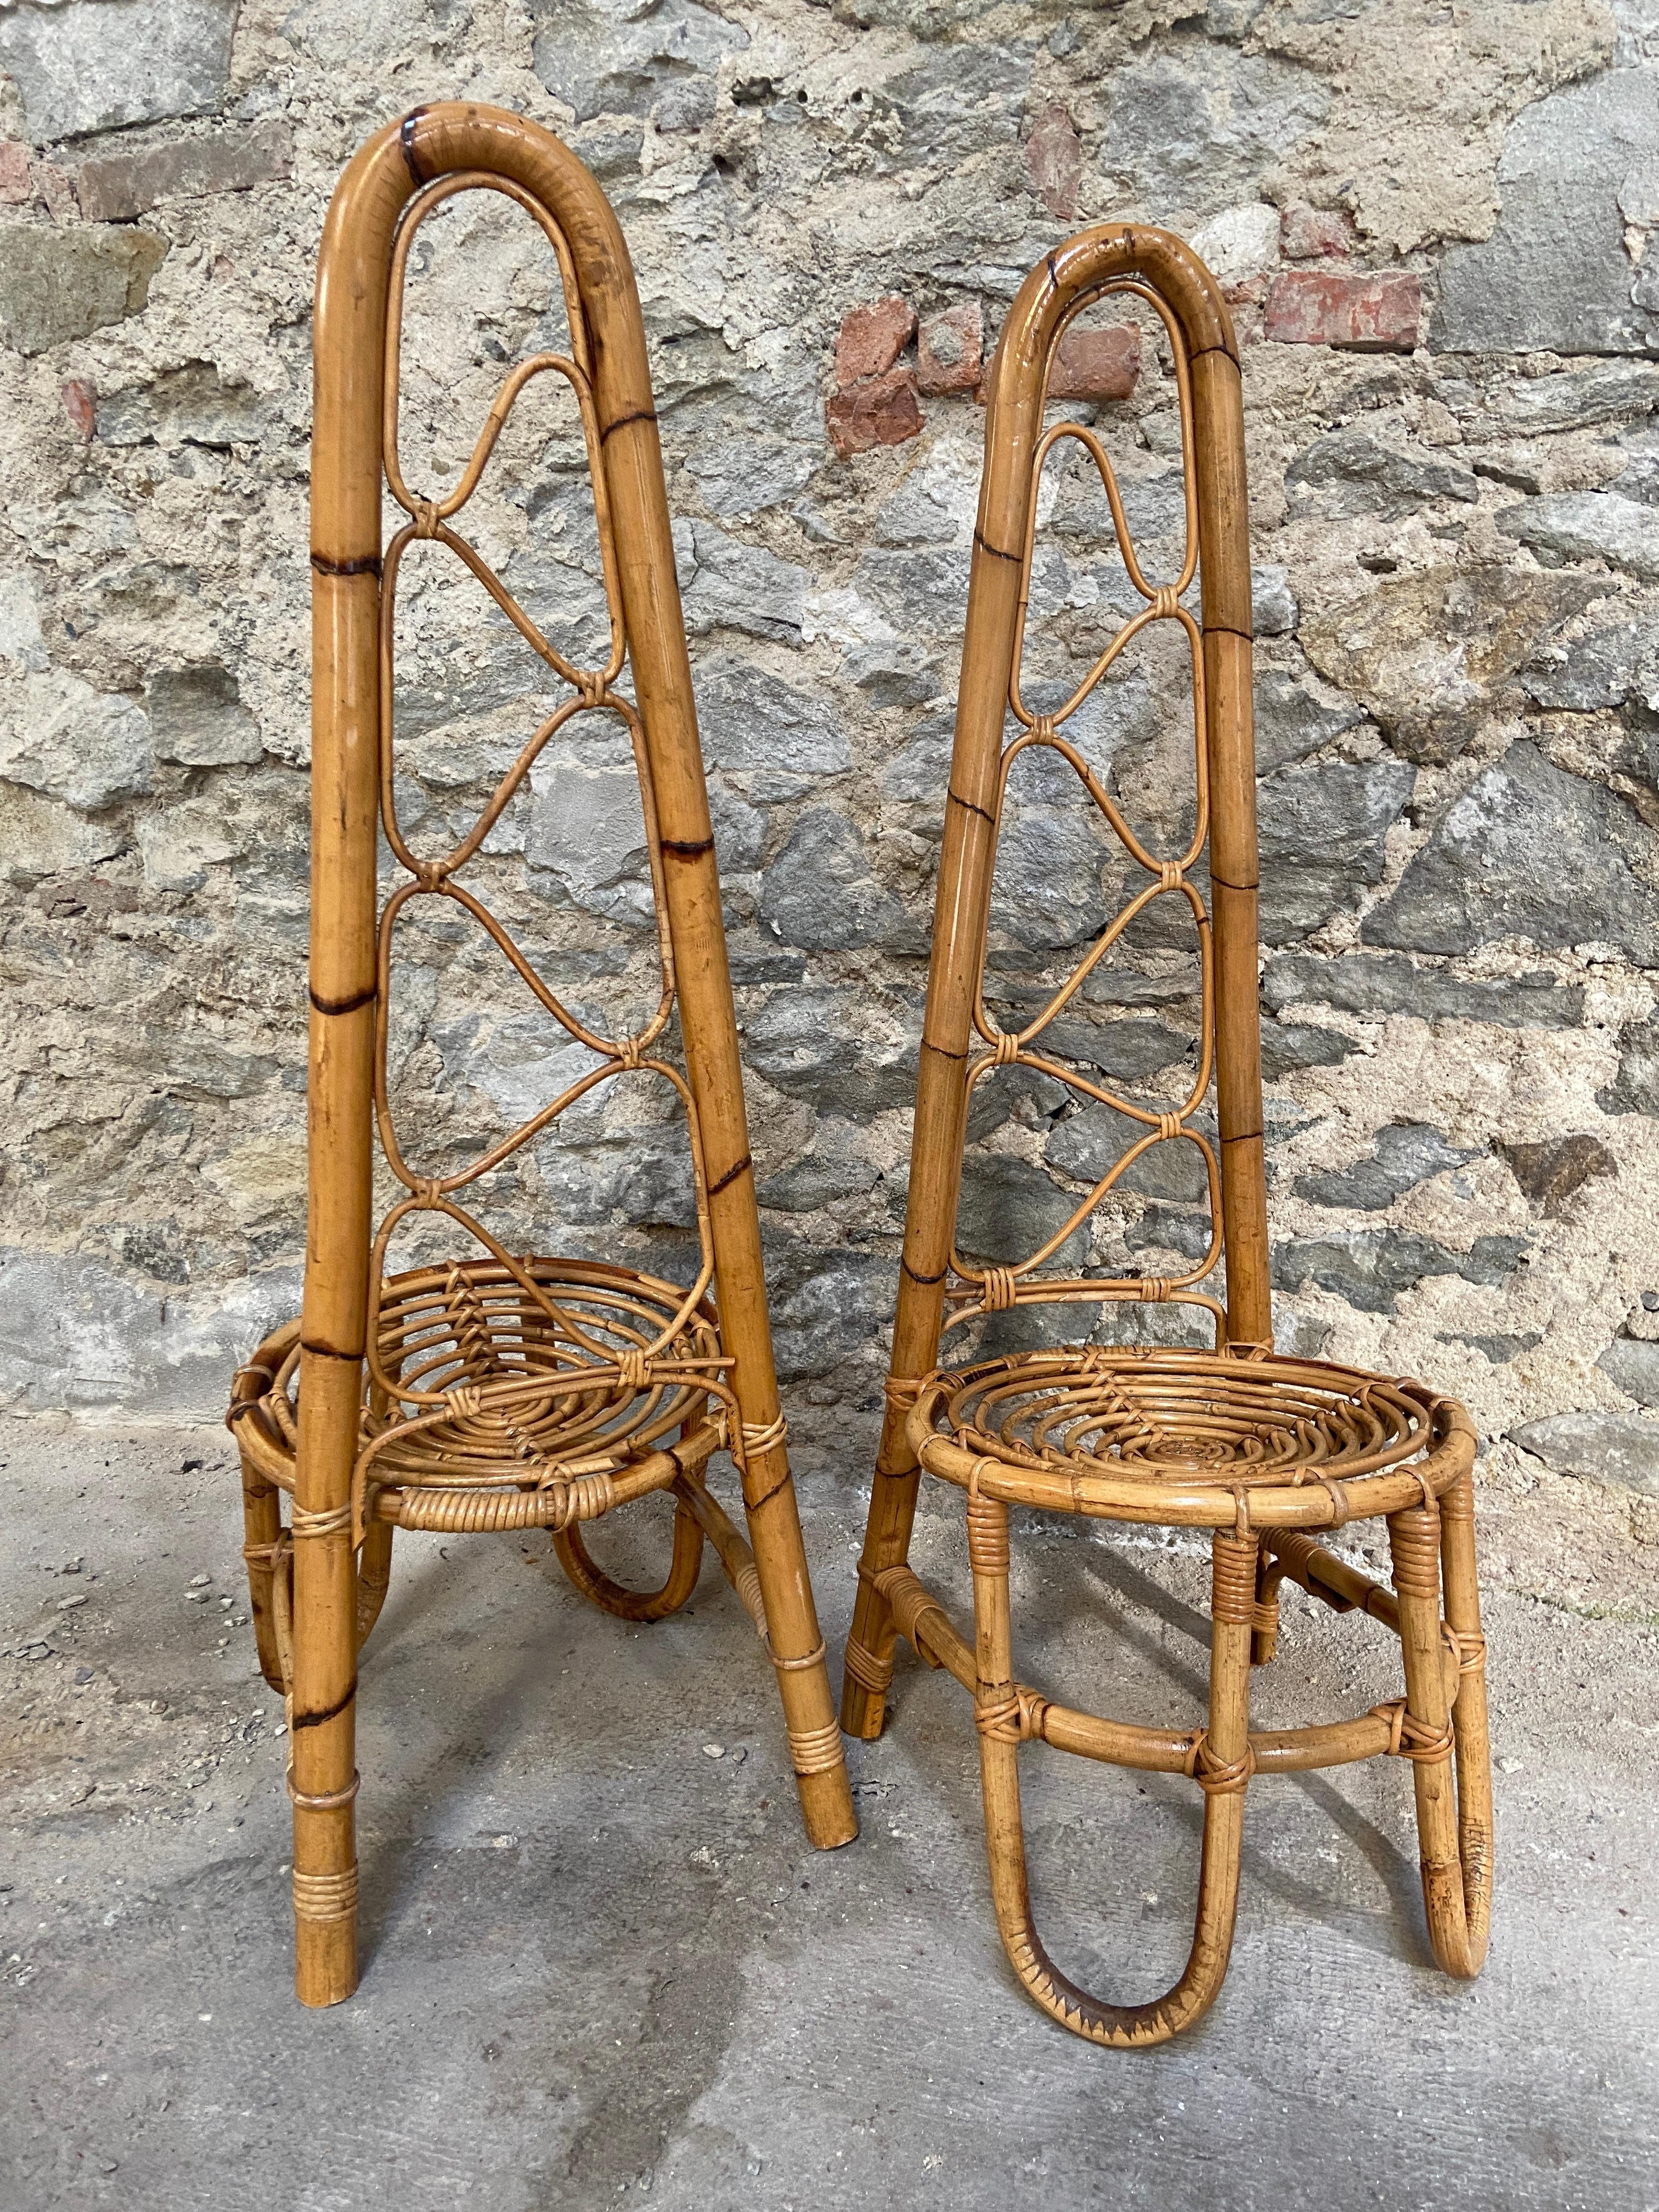 Mid-Century Modern Pair of Bamboo and Rattan Chairs from the French Riviera 1